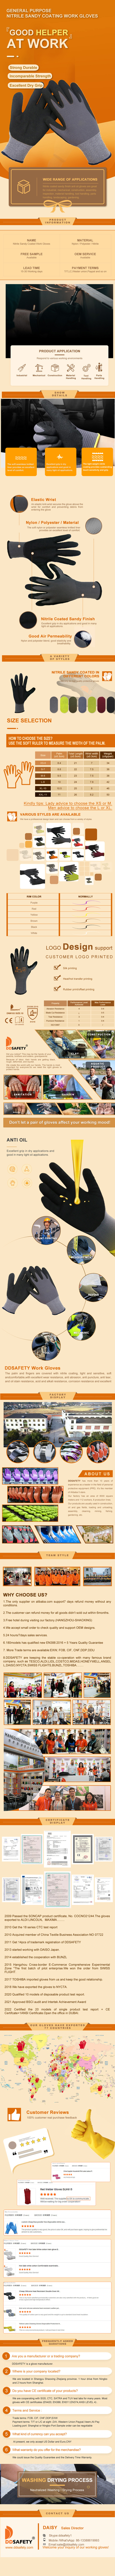 Safety Work Gloves for Hand Protection - DNN153 Safety Work Gloves for Hand Protection - DNN153 gloves,nitrile gloves,nitrile coated gloves,safety gloves,work gloves,safety work gloves